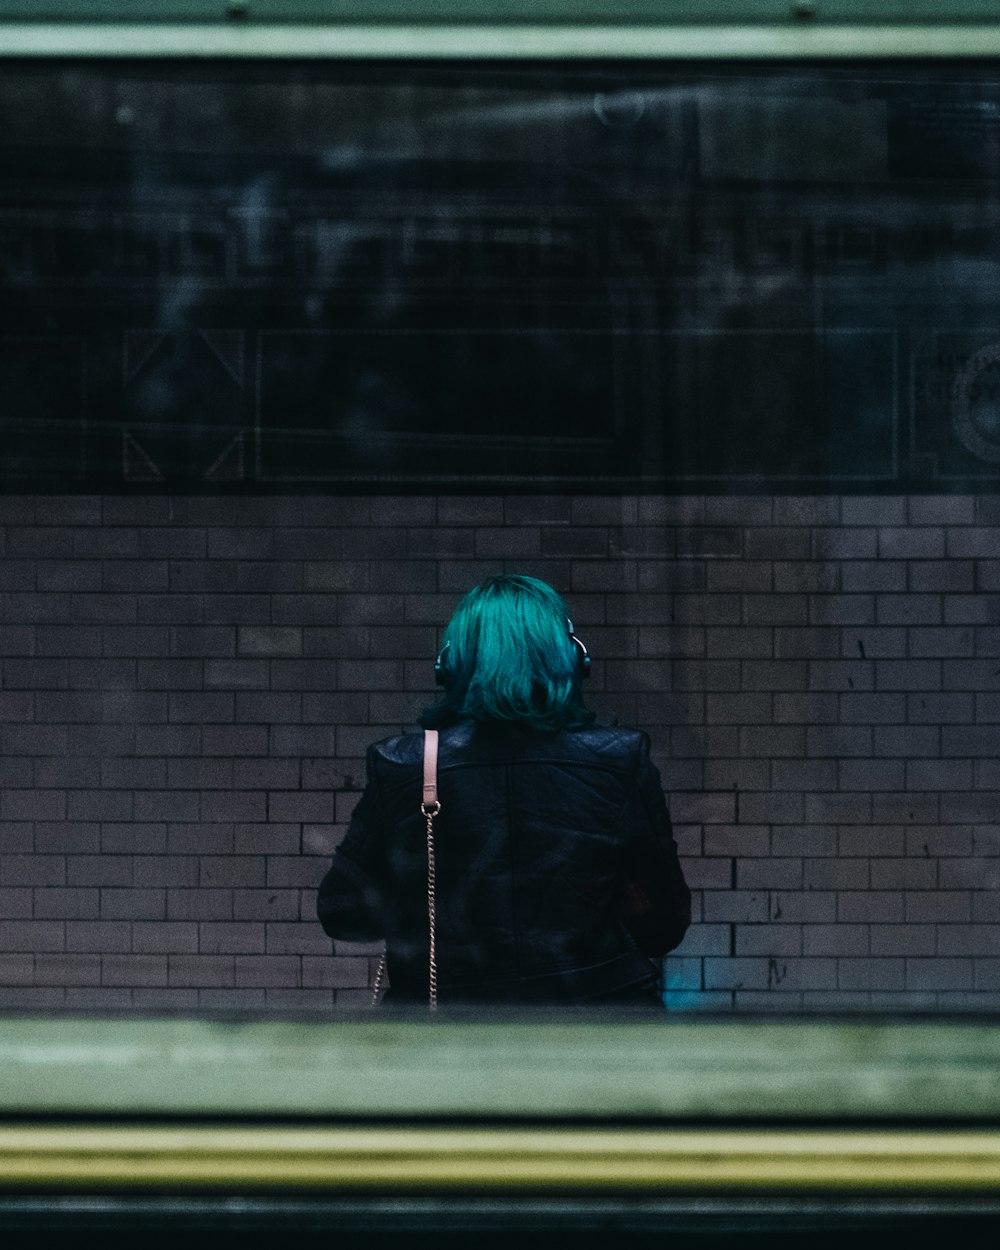 teal hair colored person standing behind glass panel